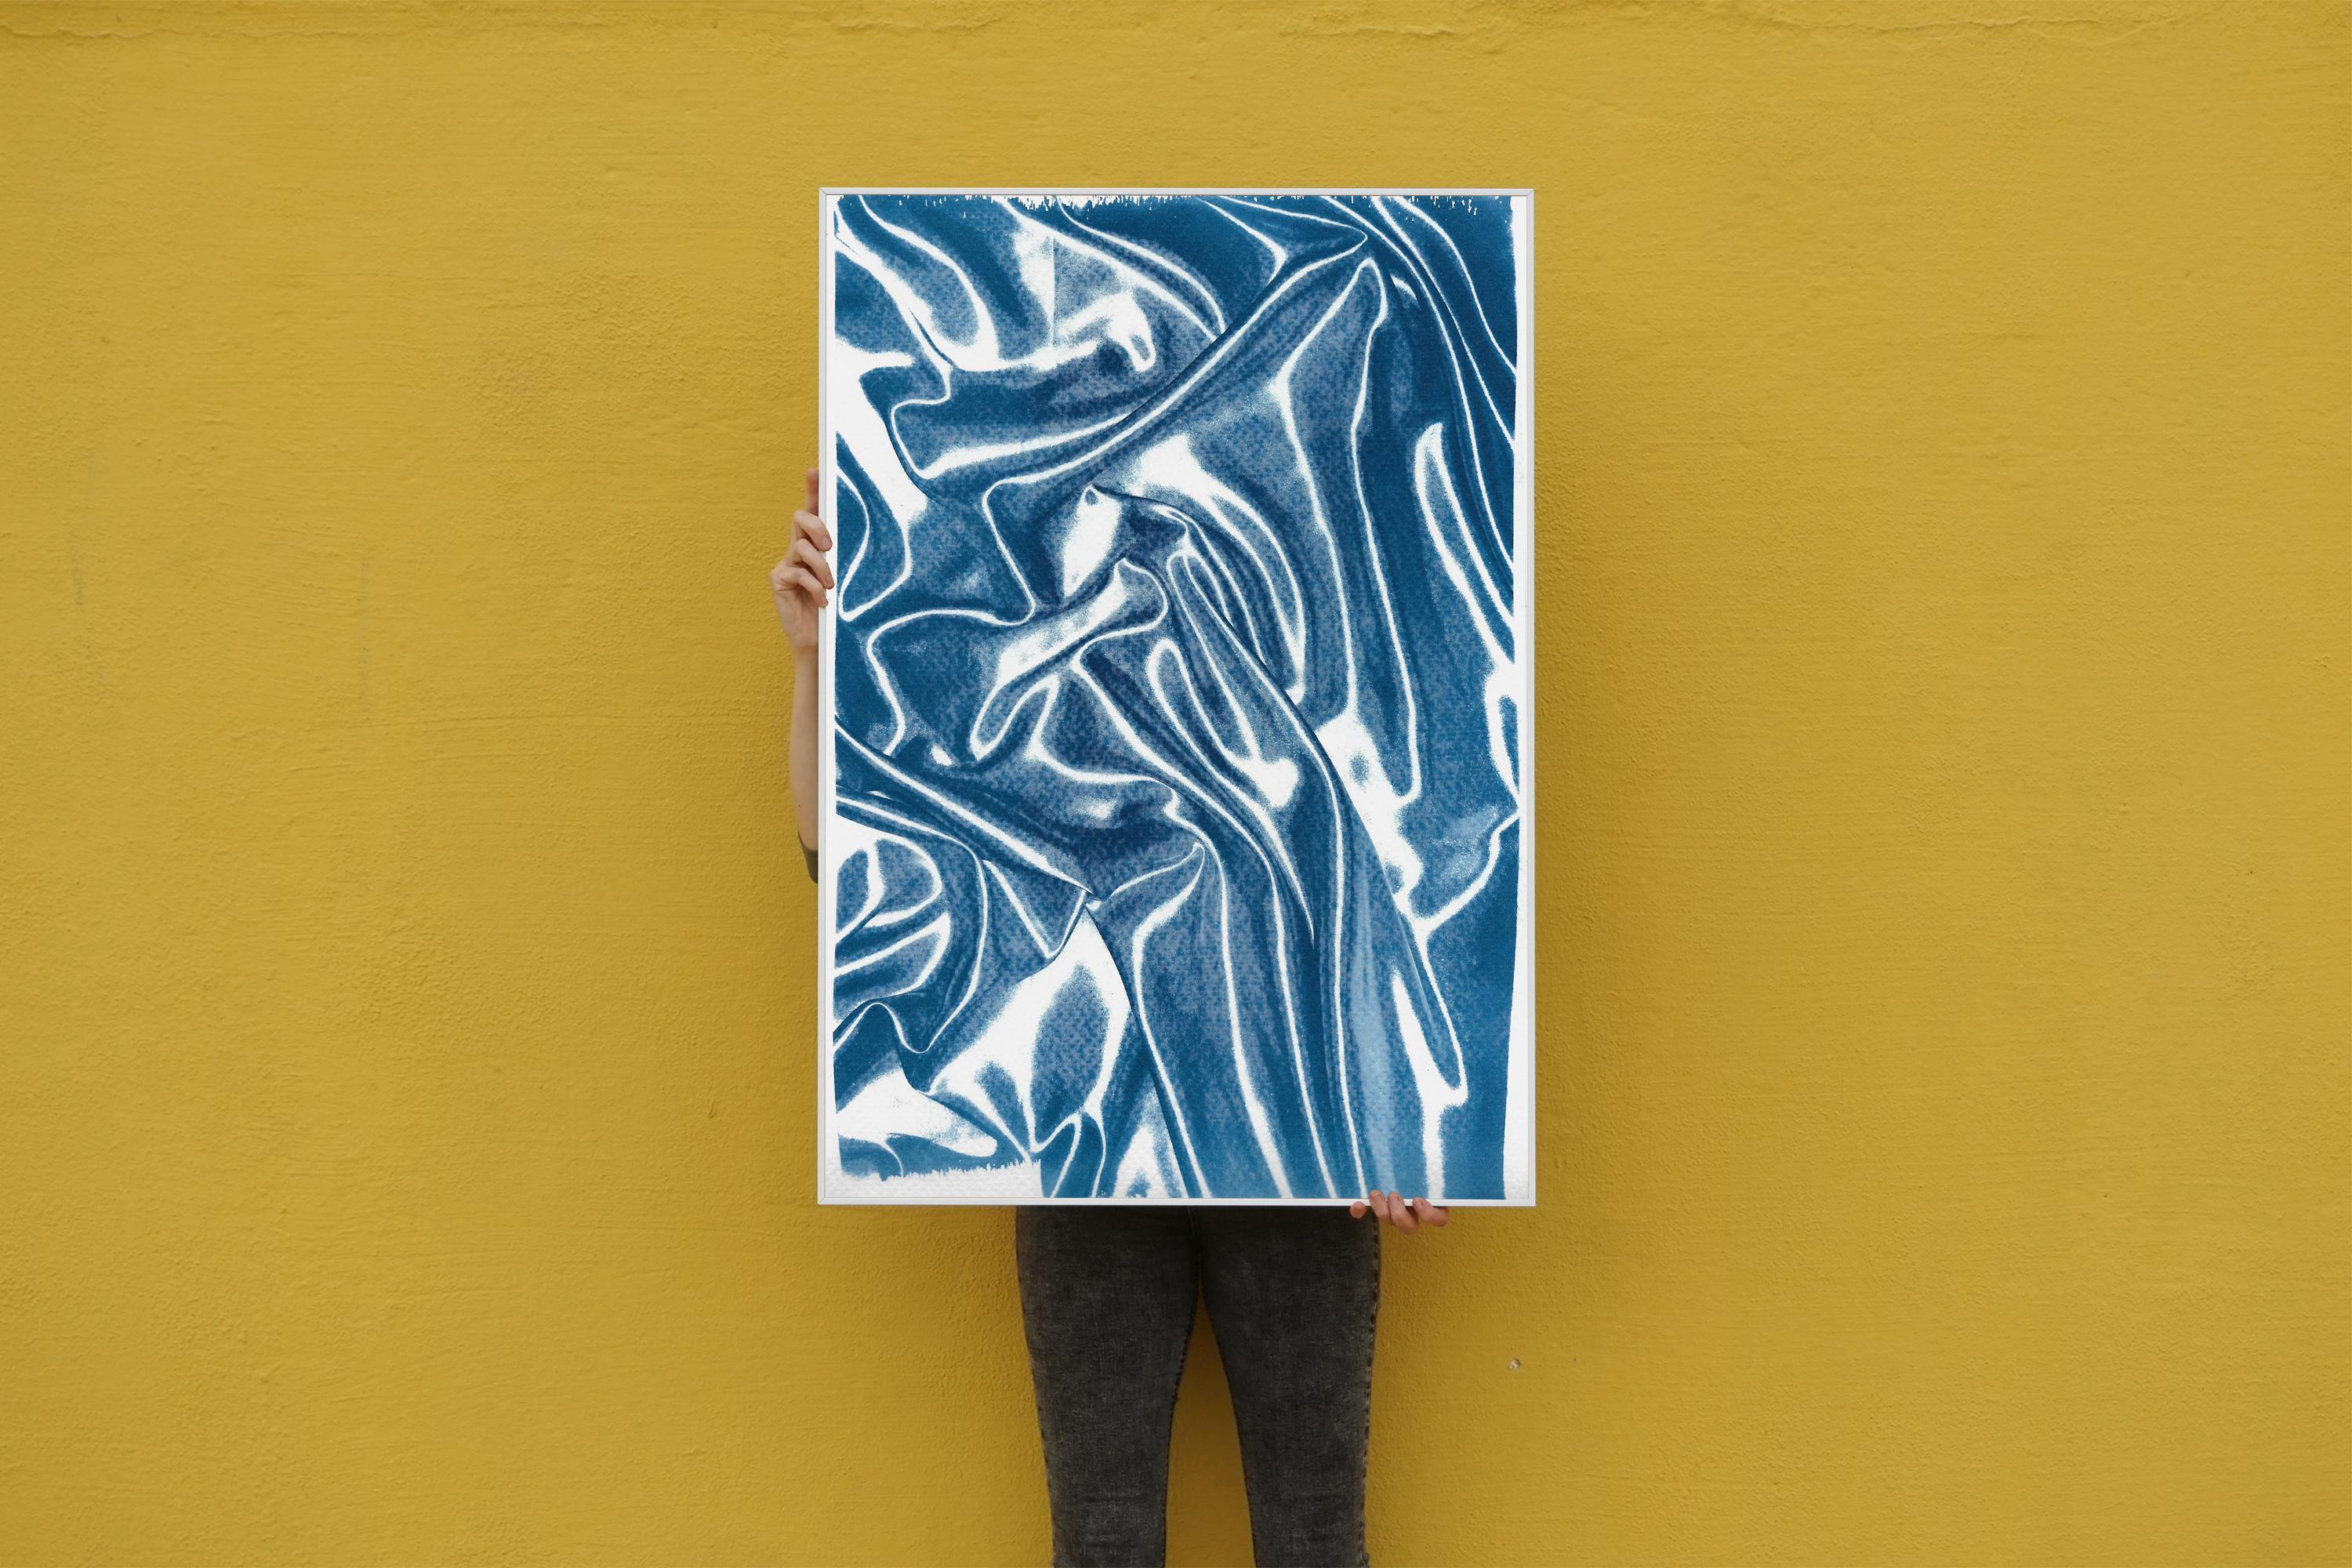 This is an exclusive handprinted limited edition cyanotype.

Details:
+ Title: Classic Blue Silk Movement nº2
+ Year: 2019
+ Edition Size: 50
+ Stamped and Certificate of Authenticity provided
+ Measurements : 70x100 cm (28x 40 in.), a standard